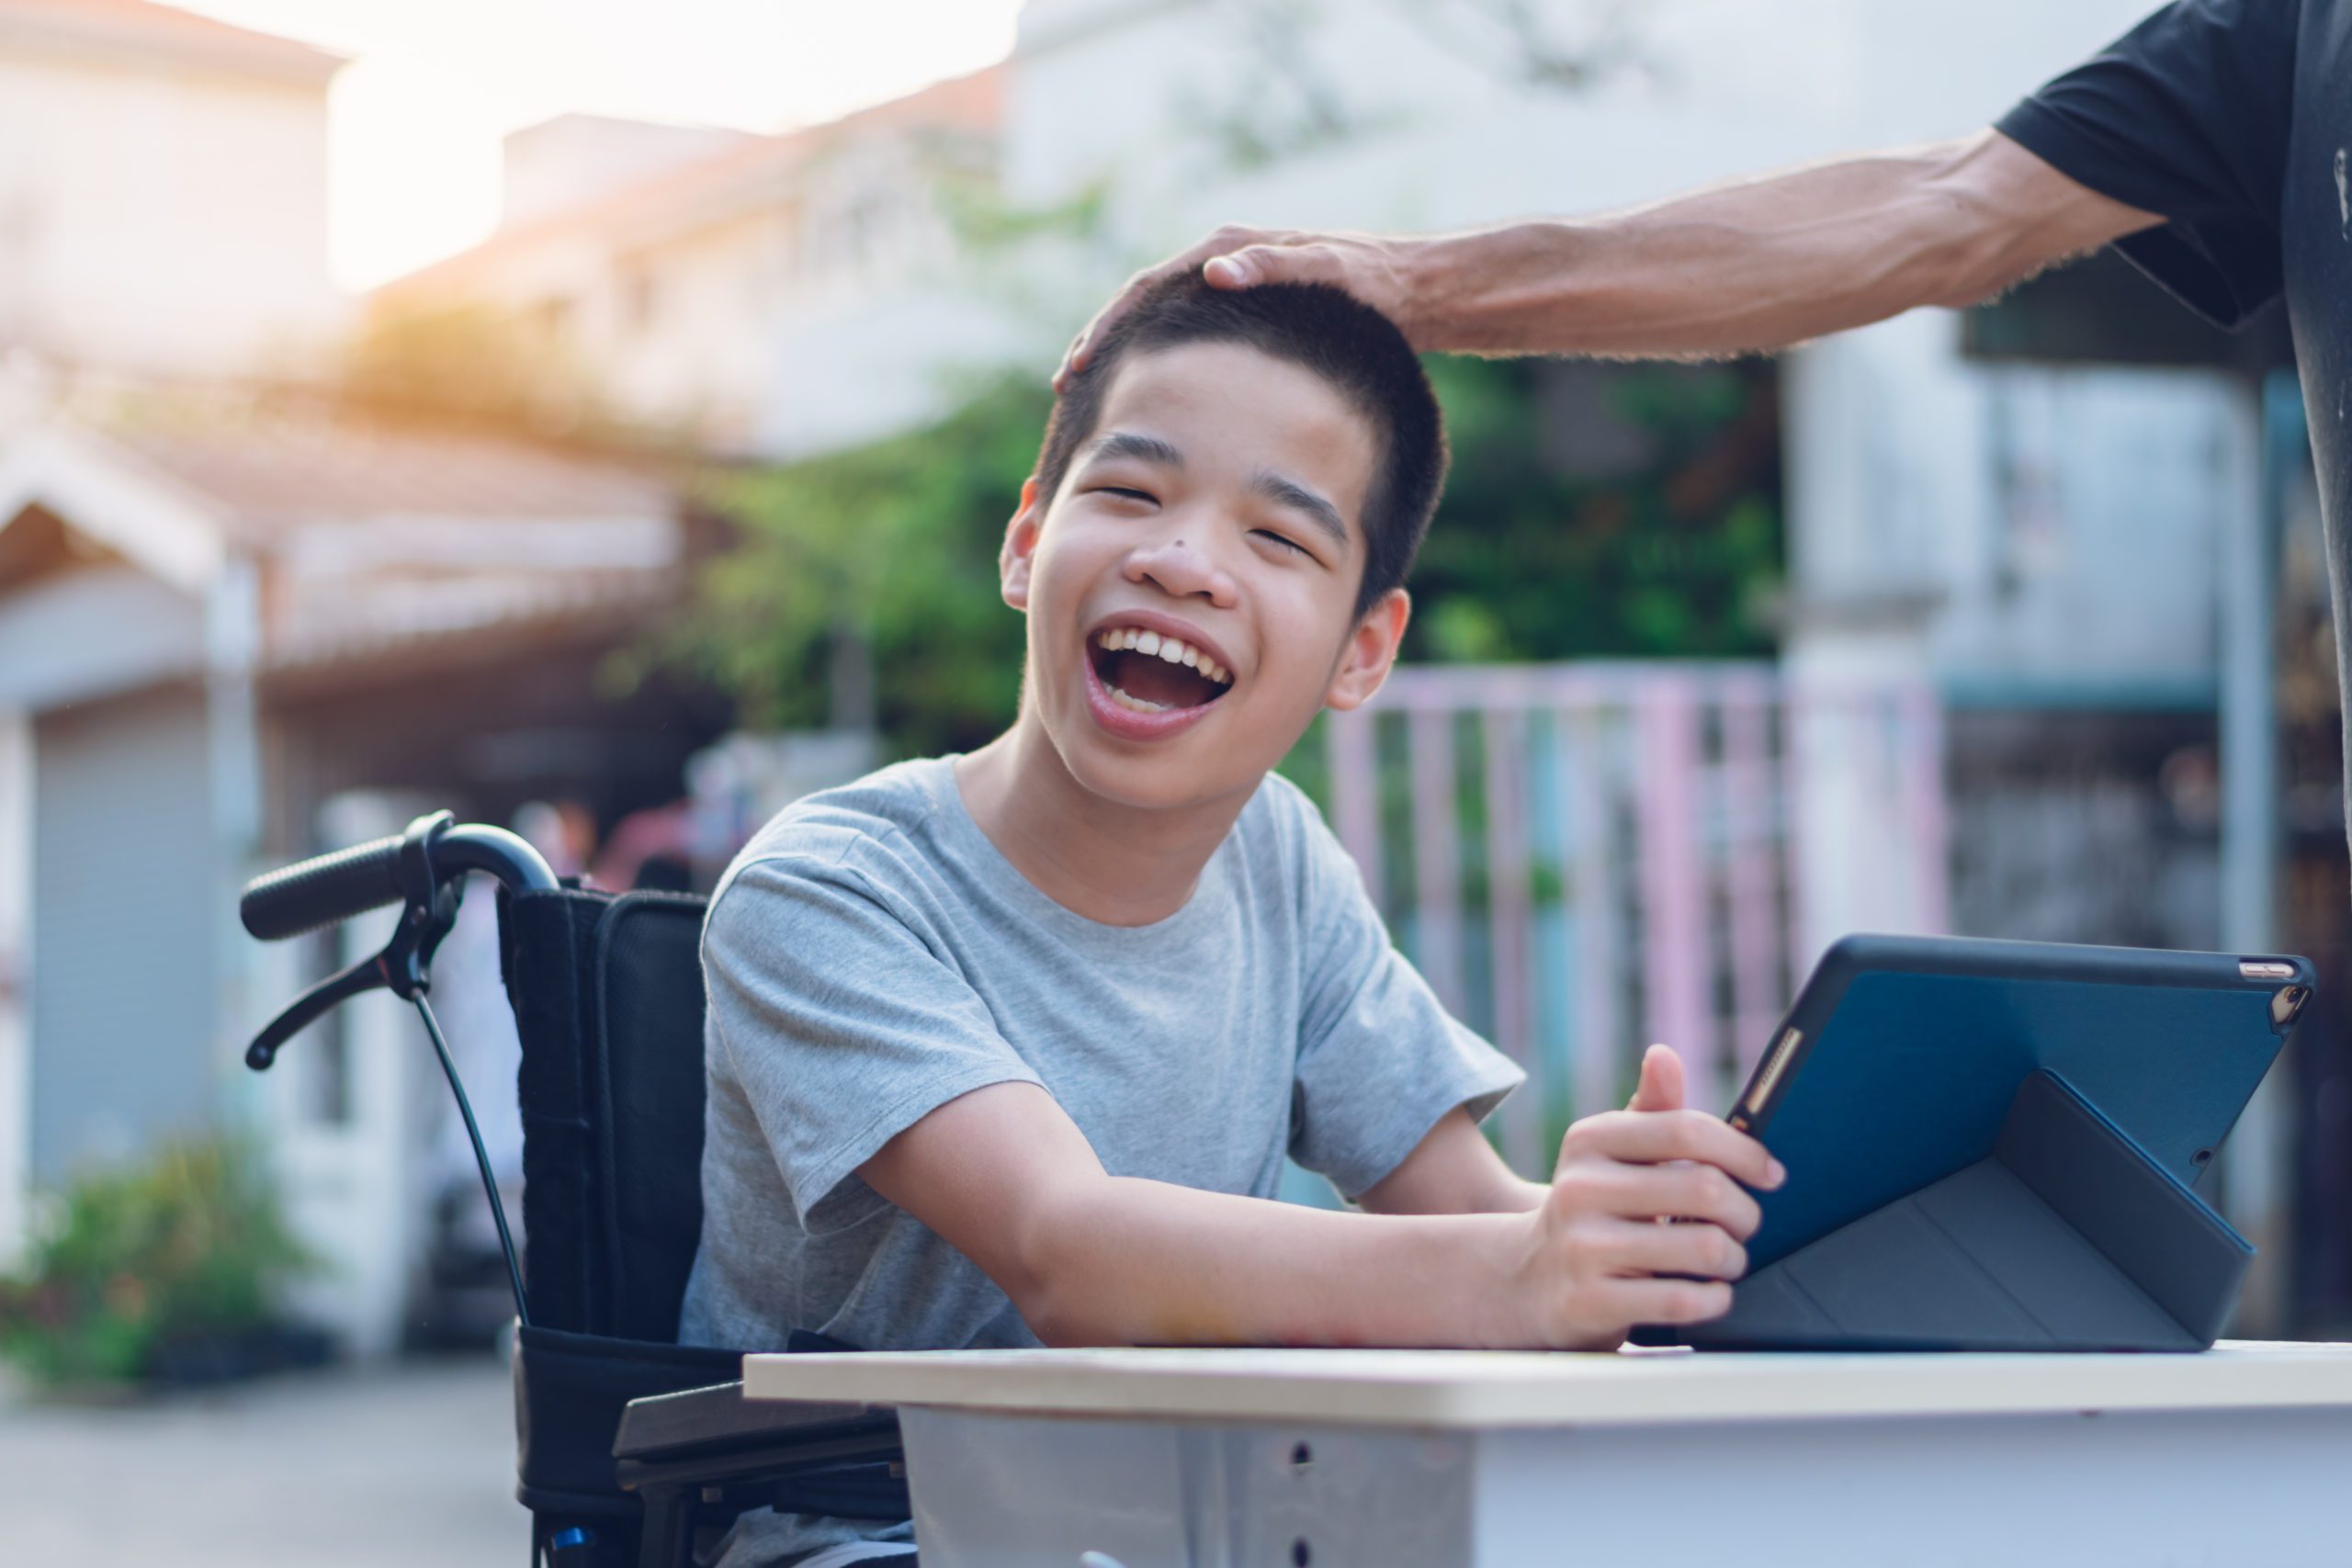 Disabilities And Special Needs Care For Kids At Home